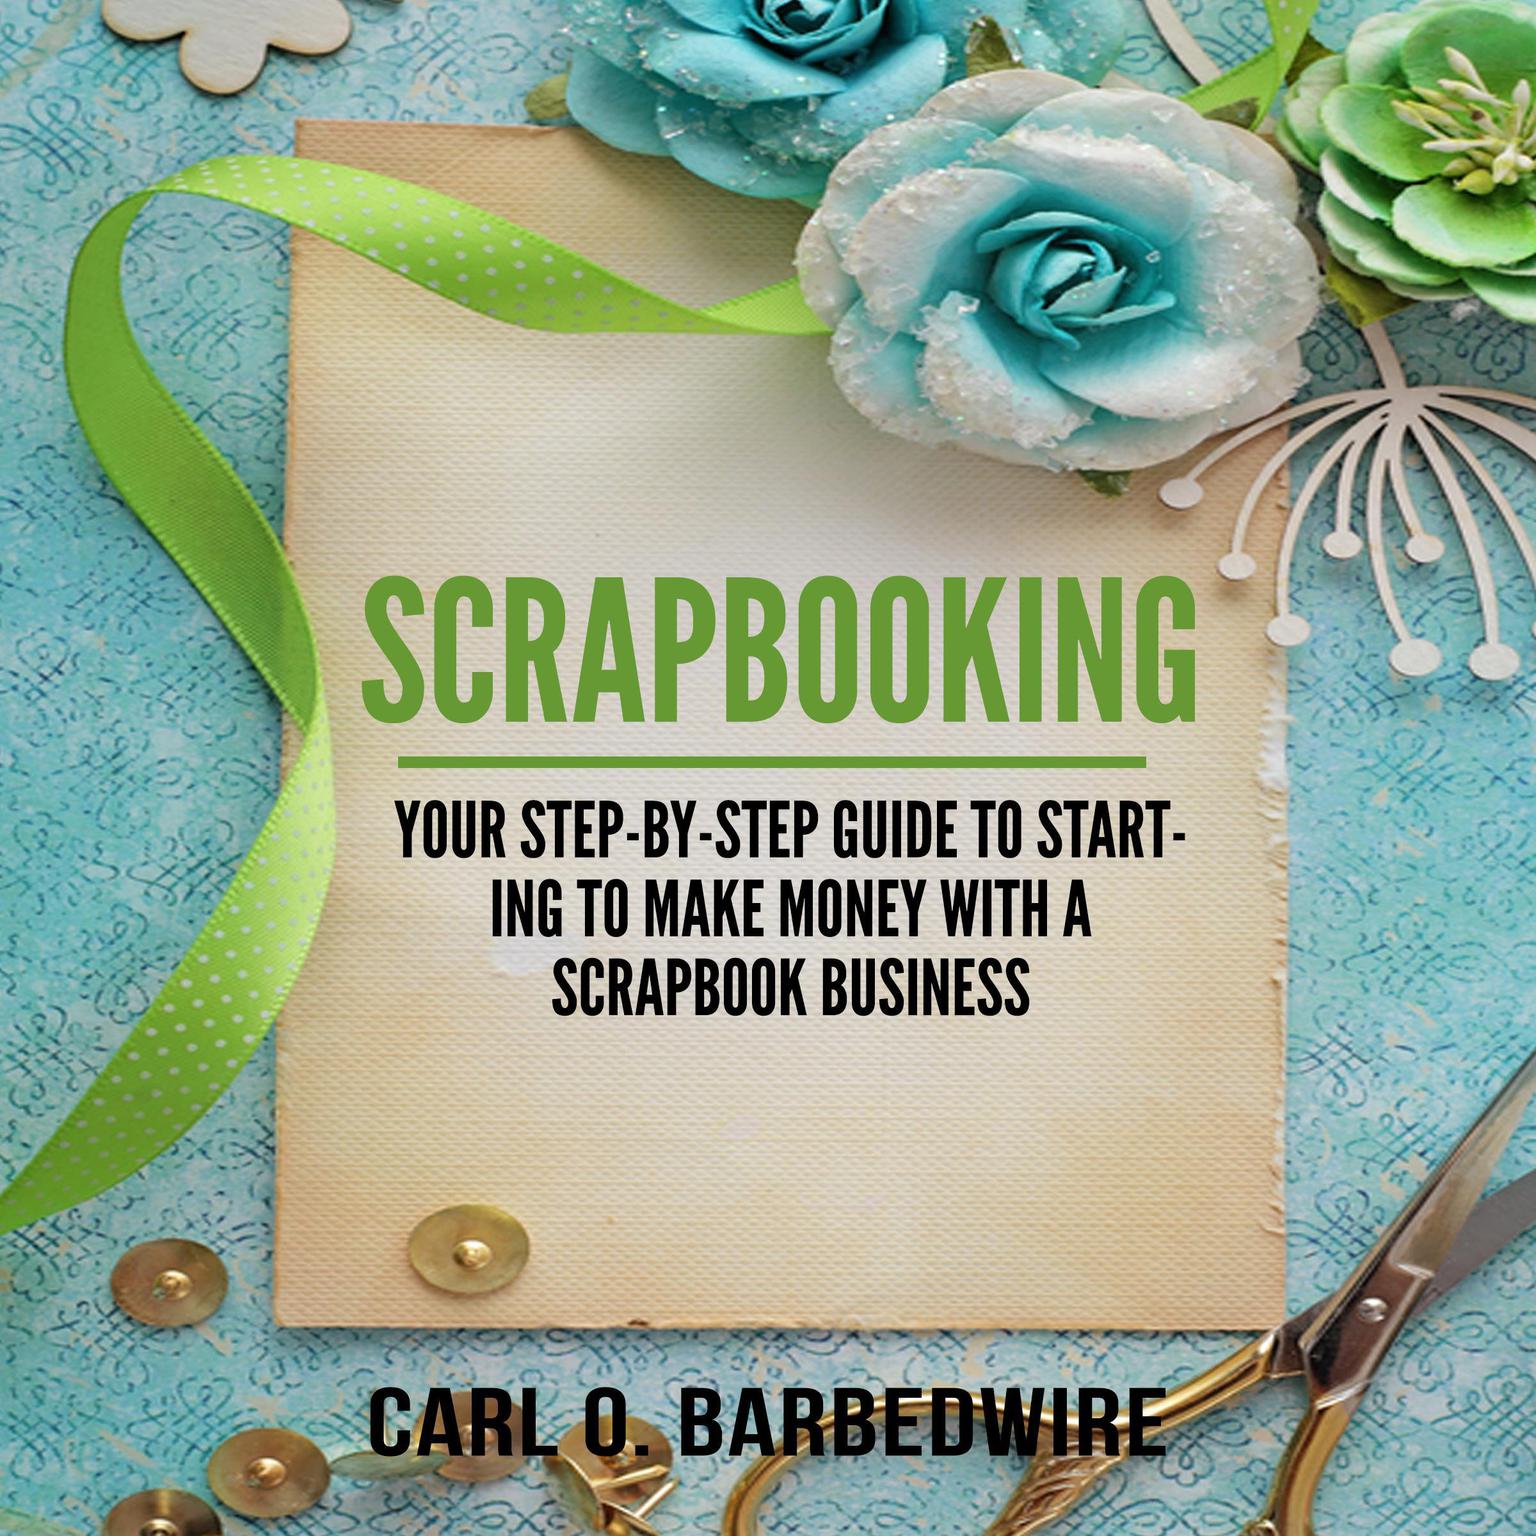 Scrapbooking: Your Step-By-Step Guide To Starting to Make Money With a Scrapbook Business Audiobook, by Carl O. Barbedwire